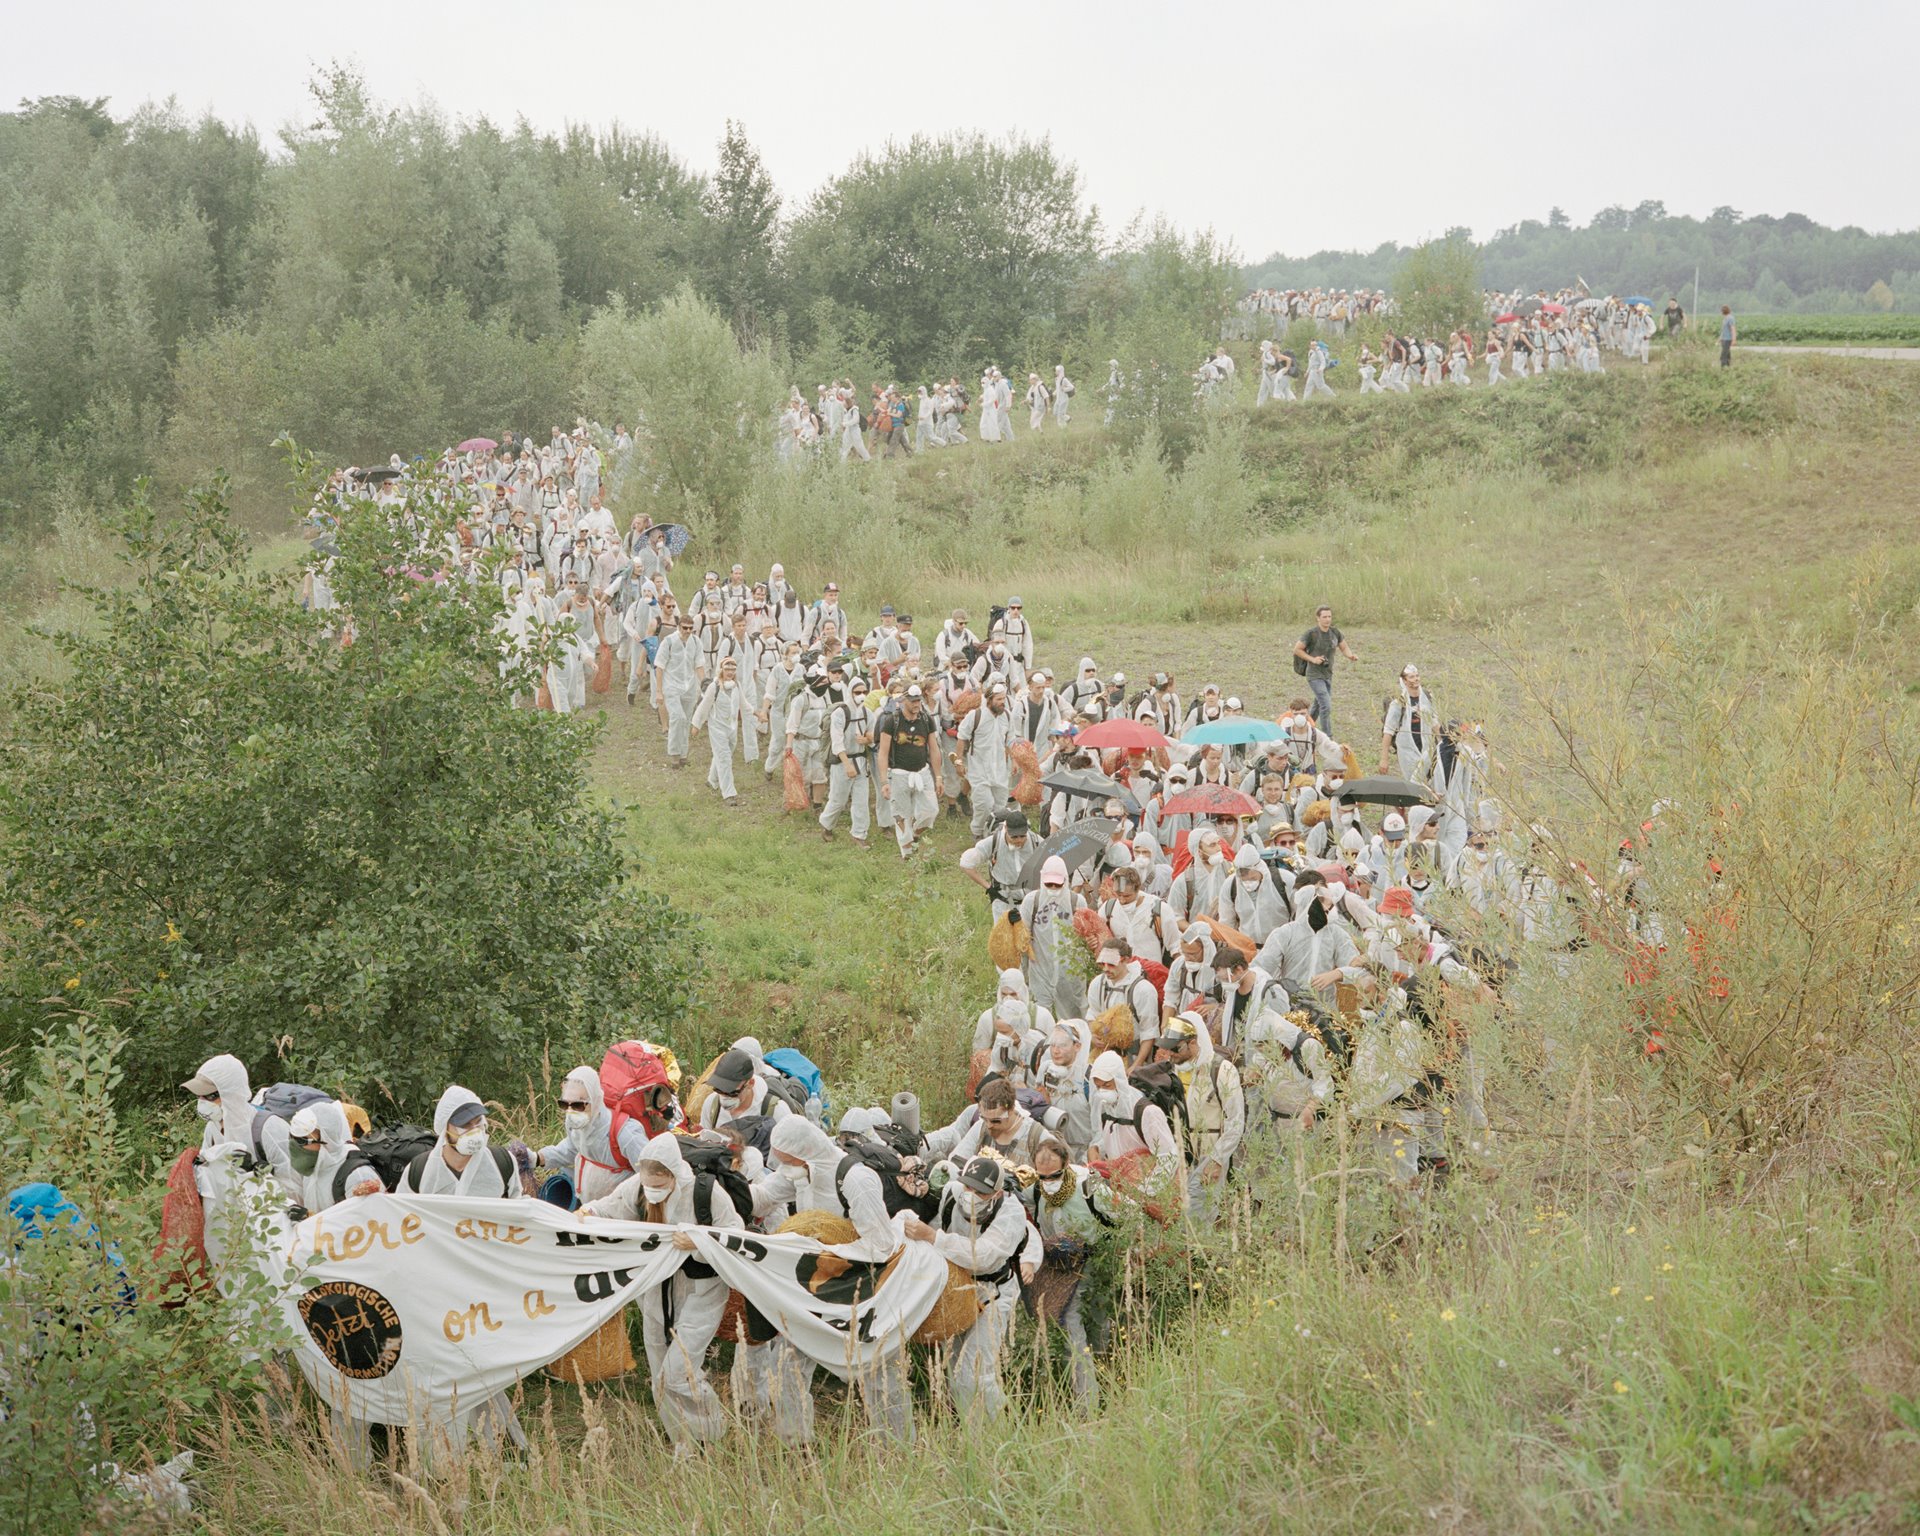 Demonstrators in Bedburg, Germany, evade a police blockade then climb back onto the road to reach the railroad track along which coal travels from Hambach open pit mine to the Niederaussem, Neurath, and Frimmersdorf power plants. According to a 2019 Energy Transition study, these plants emit some 75 million tons of CO2 annually.&nbsp;